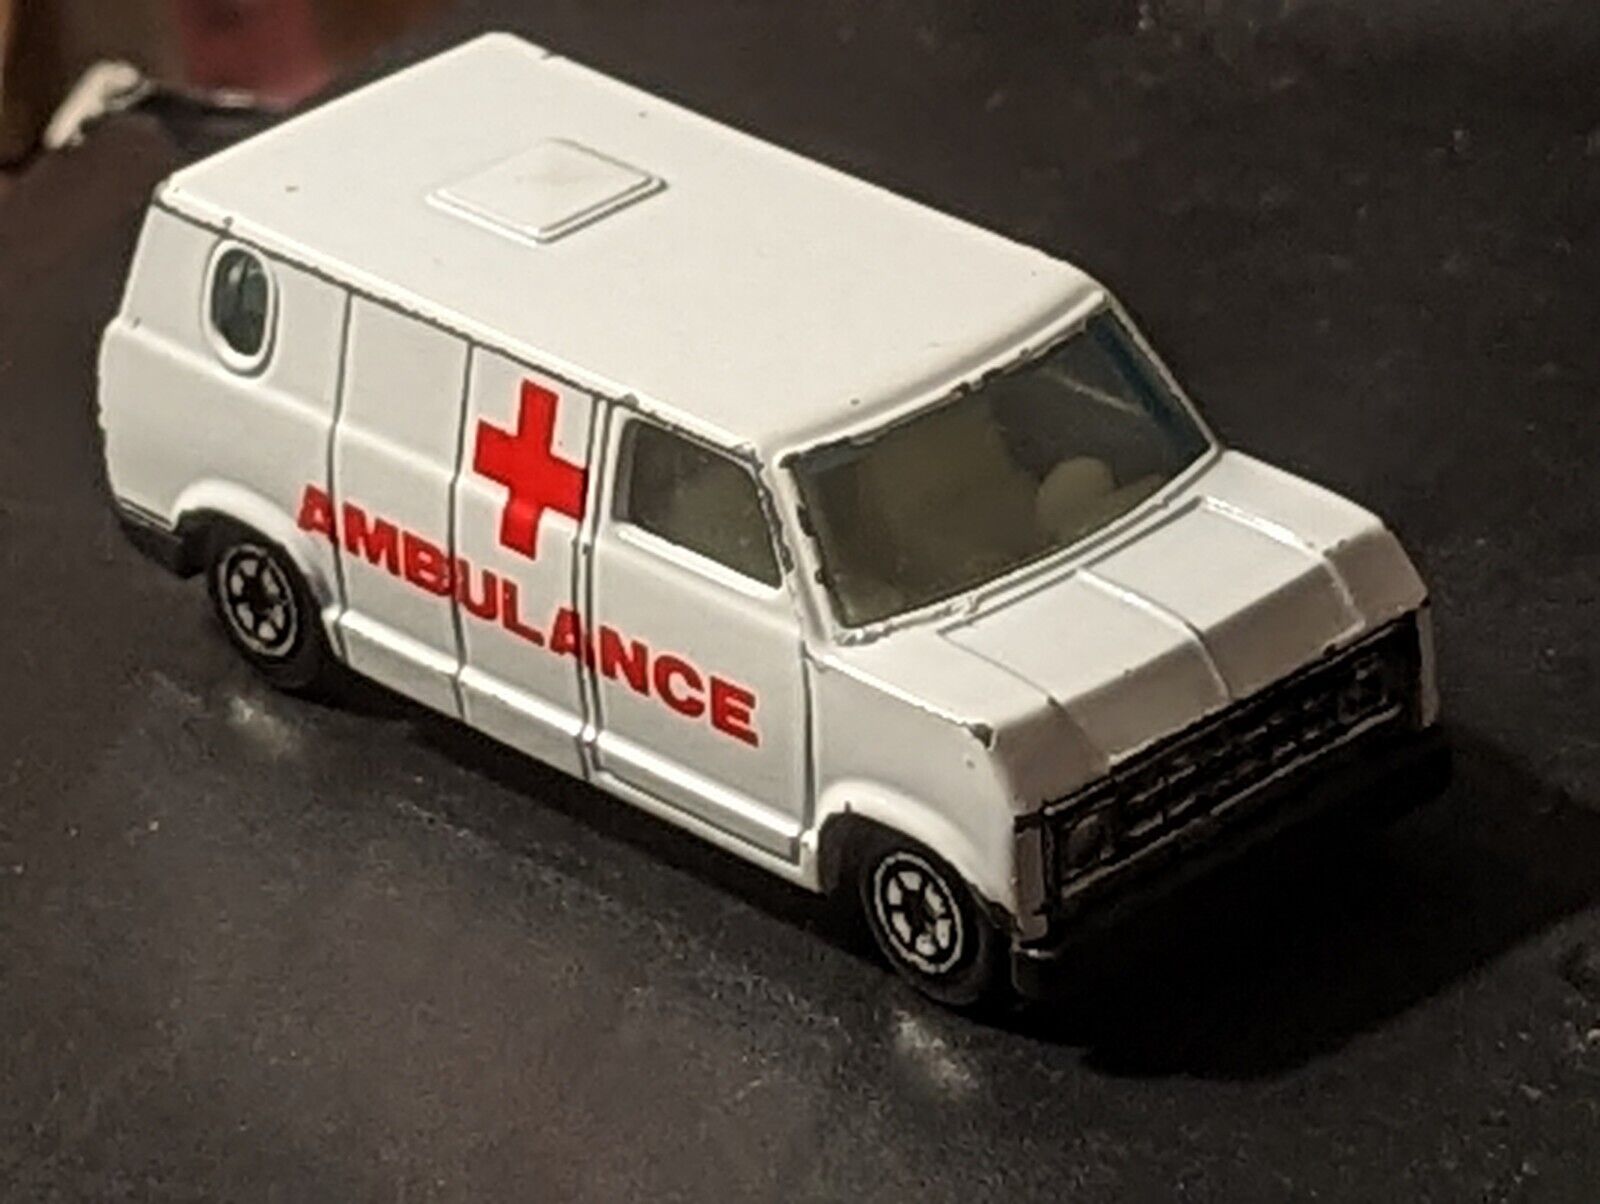 RELIABLE EMERGENCY AMBULANCE RESCUE TRUCK 1:64 SCALE MFG 1990'S 